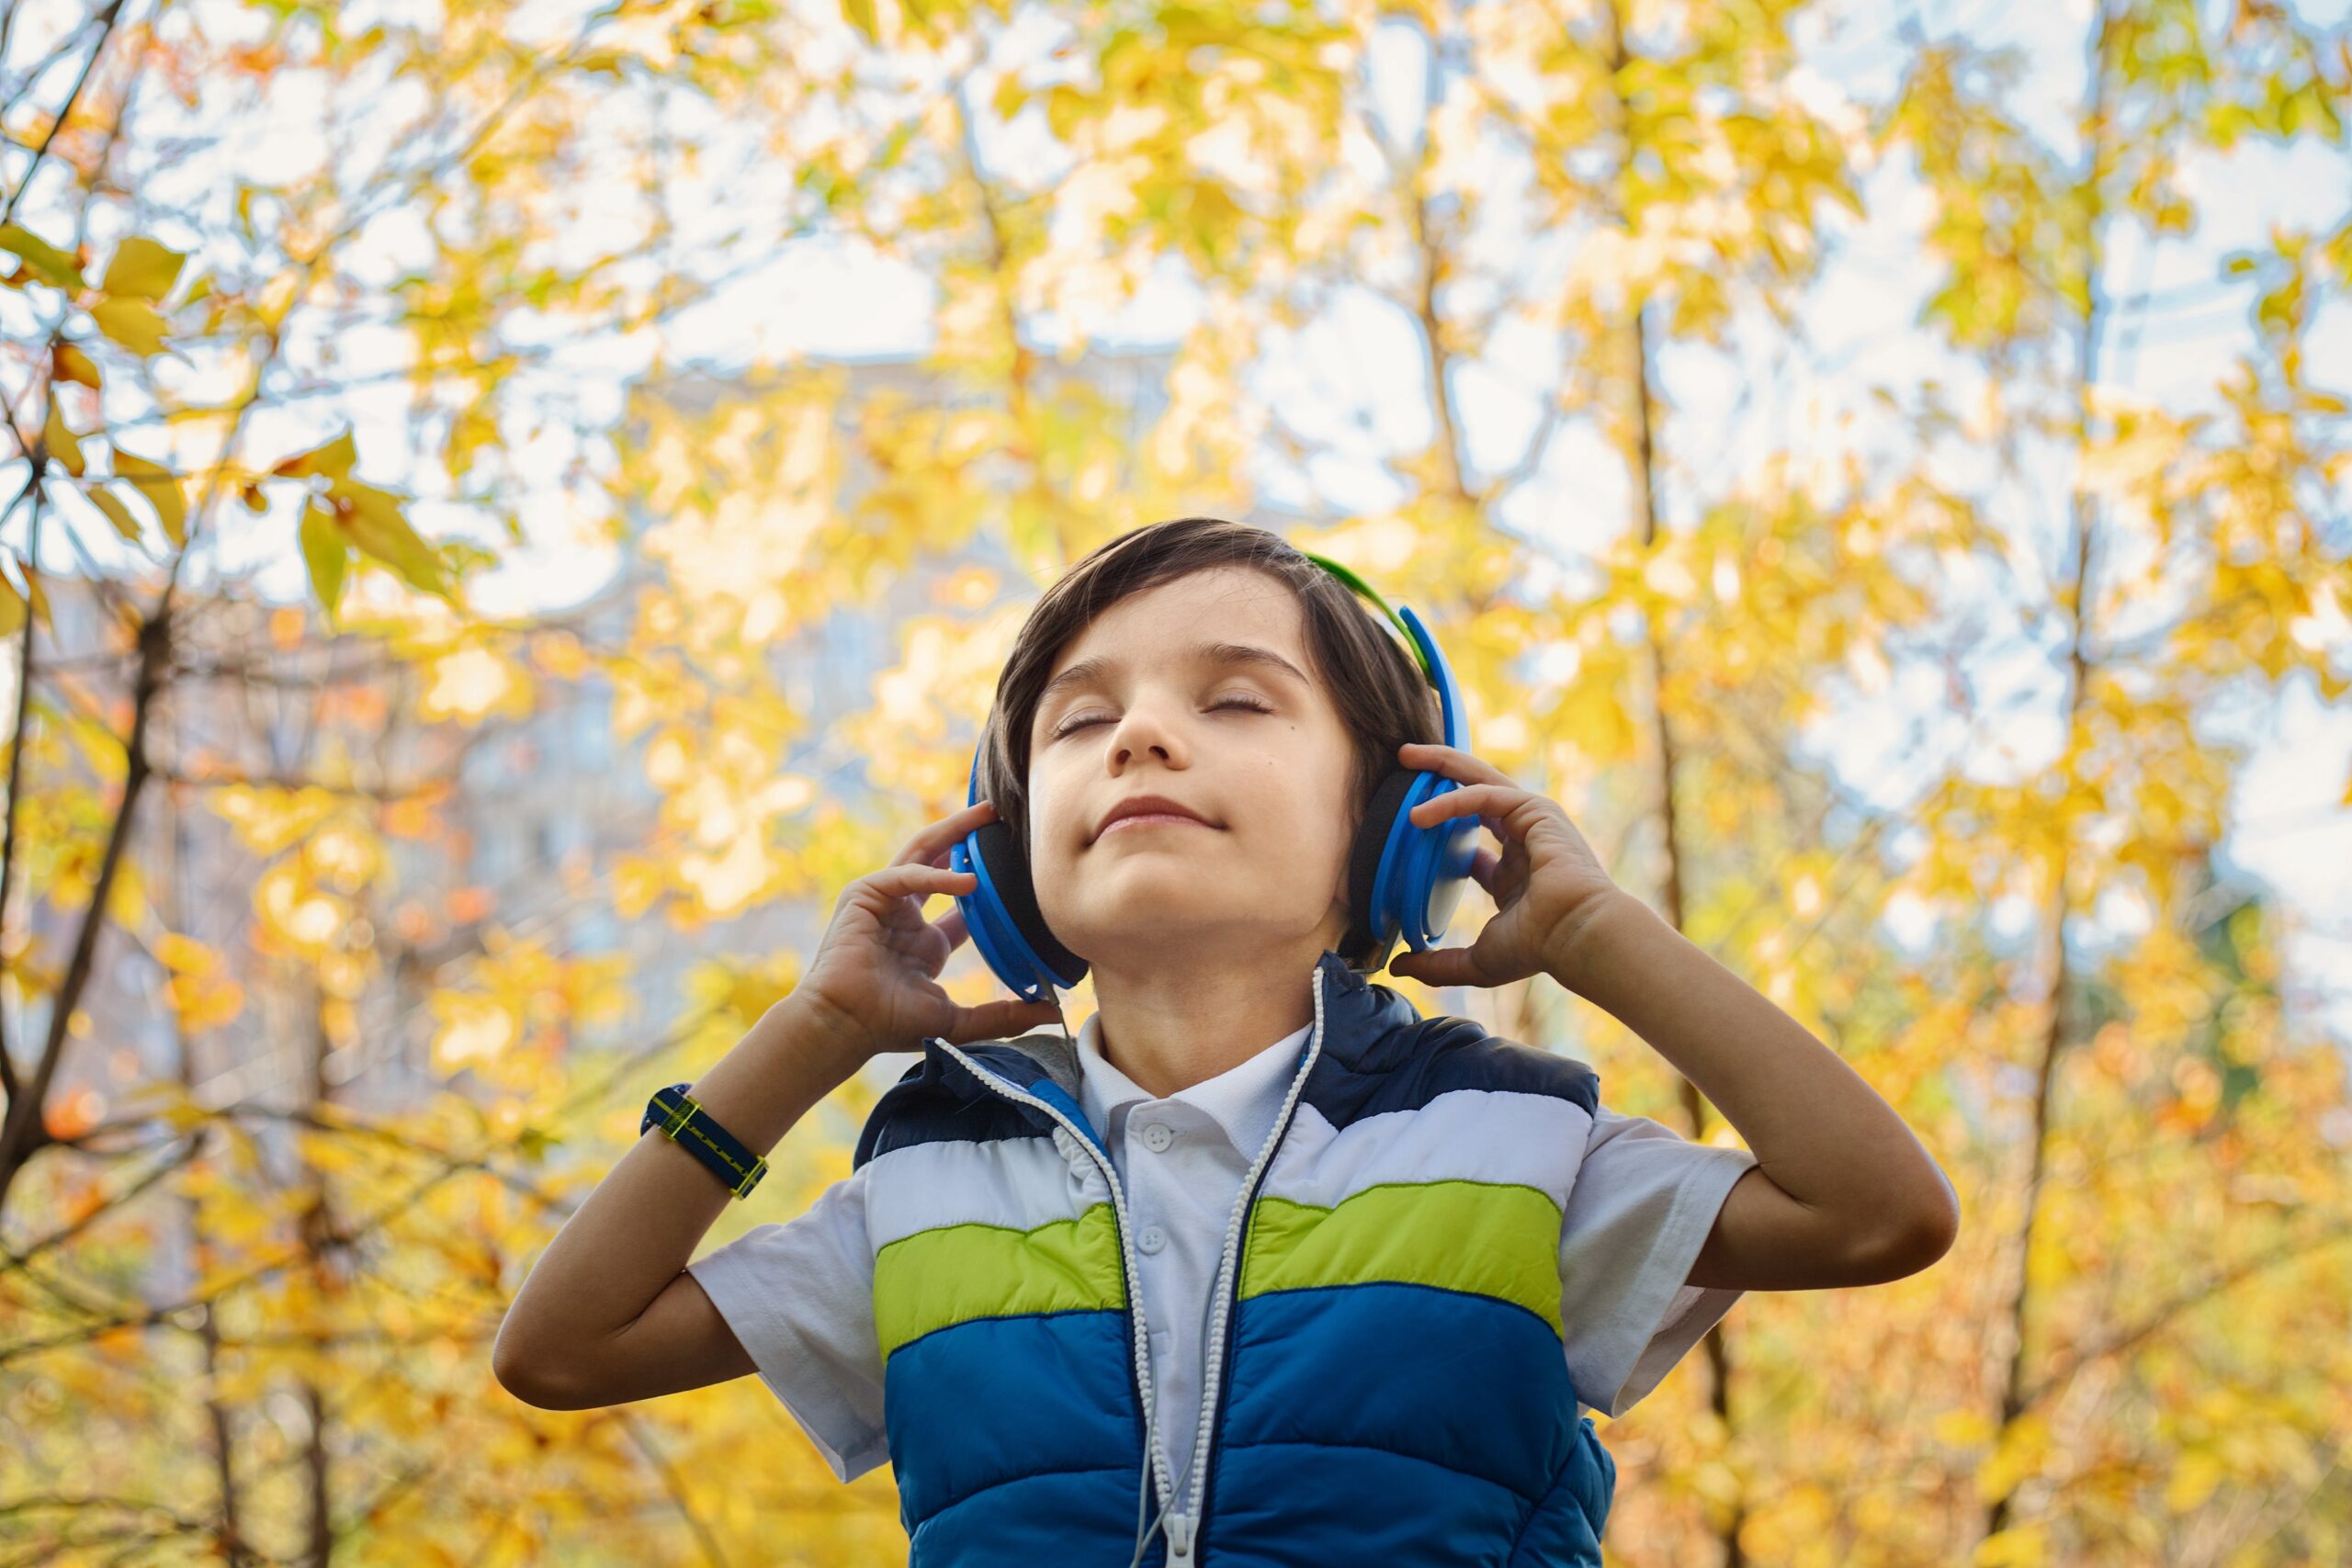 Kid-Friendly Beats Choosing the Perfect Headphones for Your Little Ones